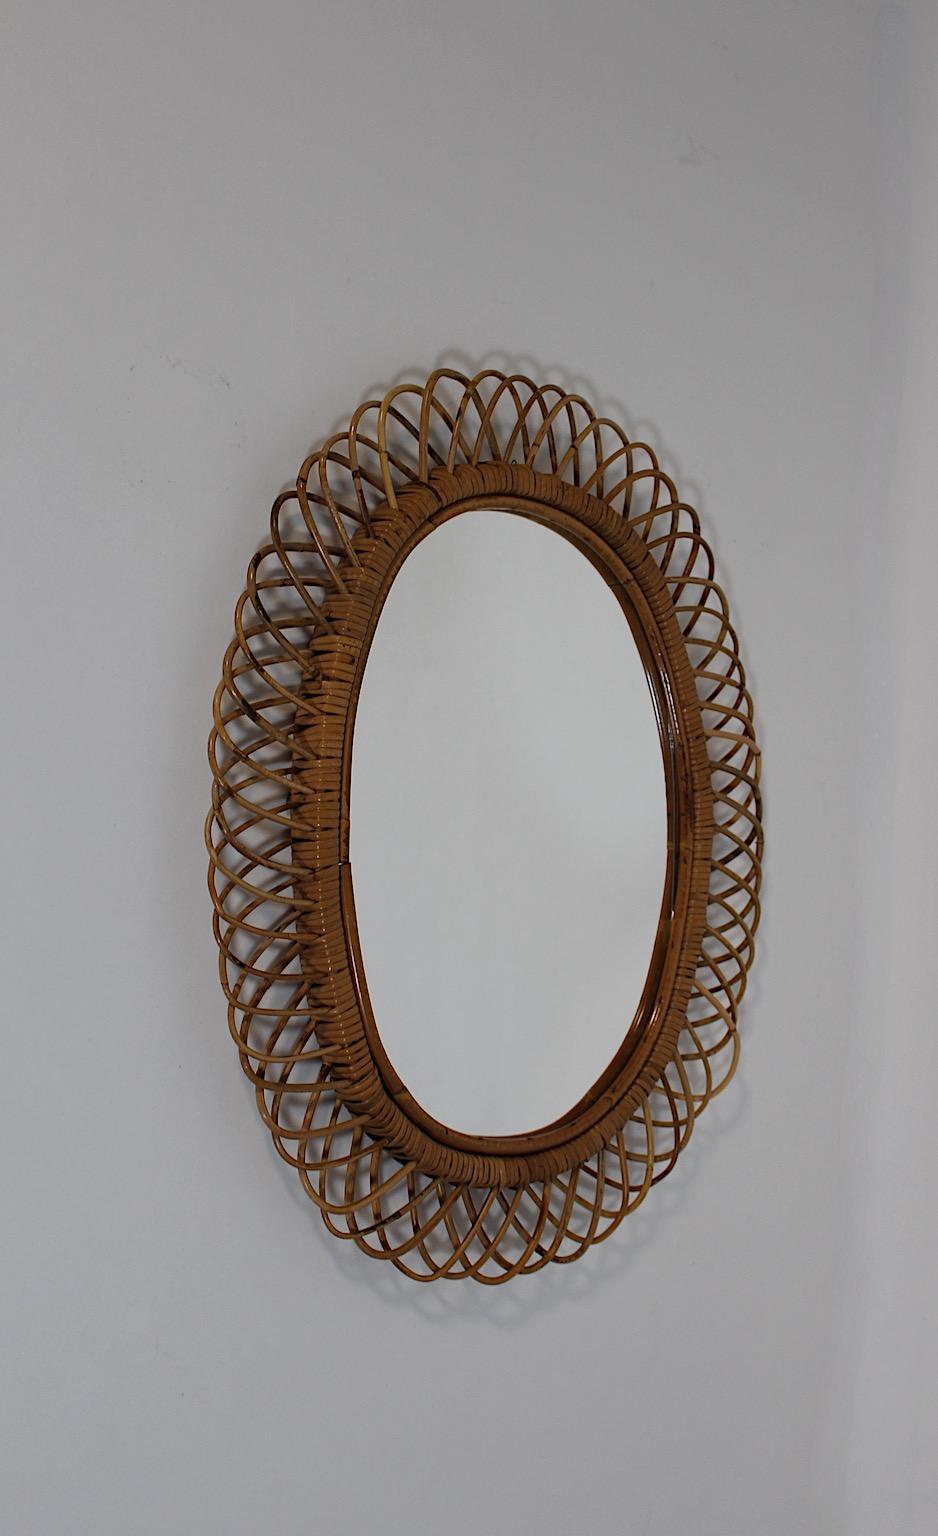 Riviera Style Vintage Rattan Oval Wall Mirror Sunburst Mirror, 1960s, Italy In Good Condition For Sale In Vienna, AT